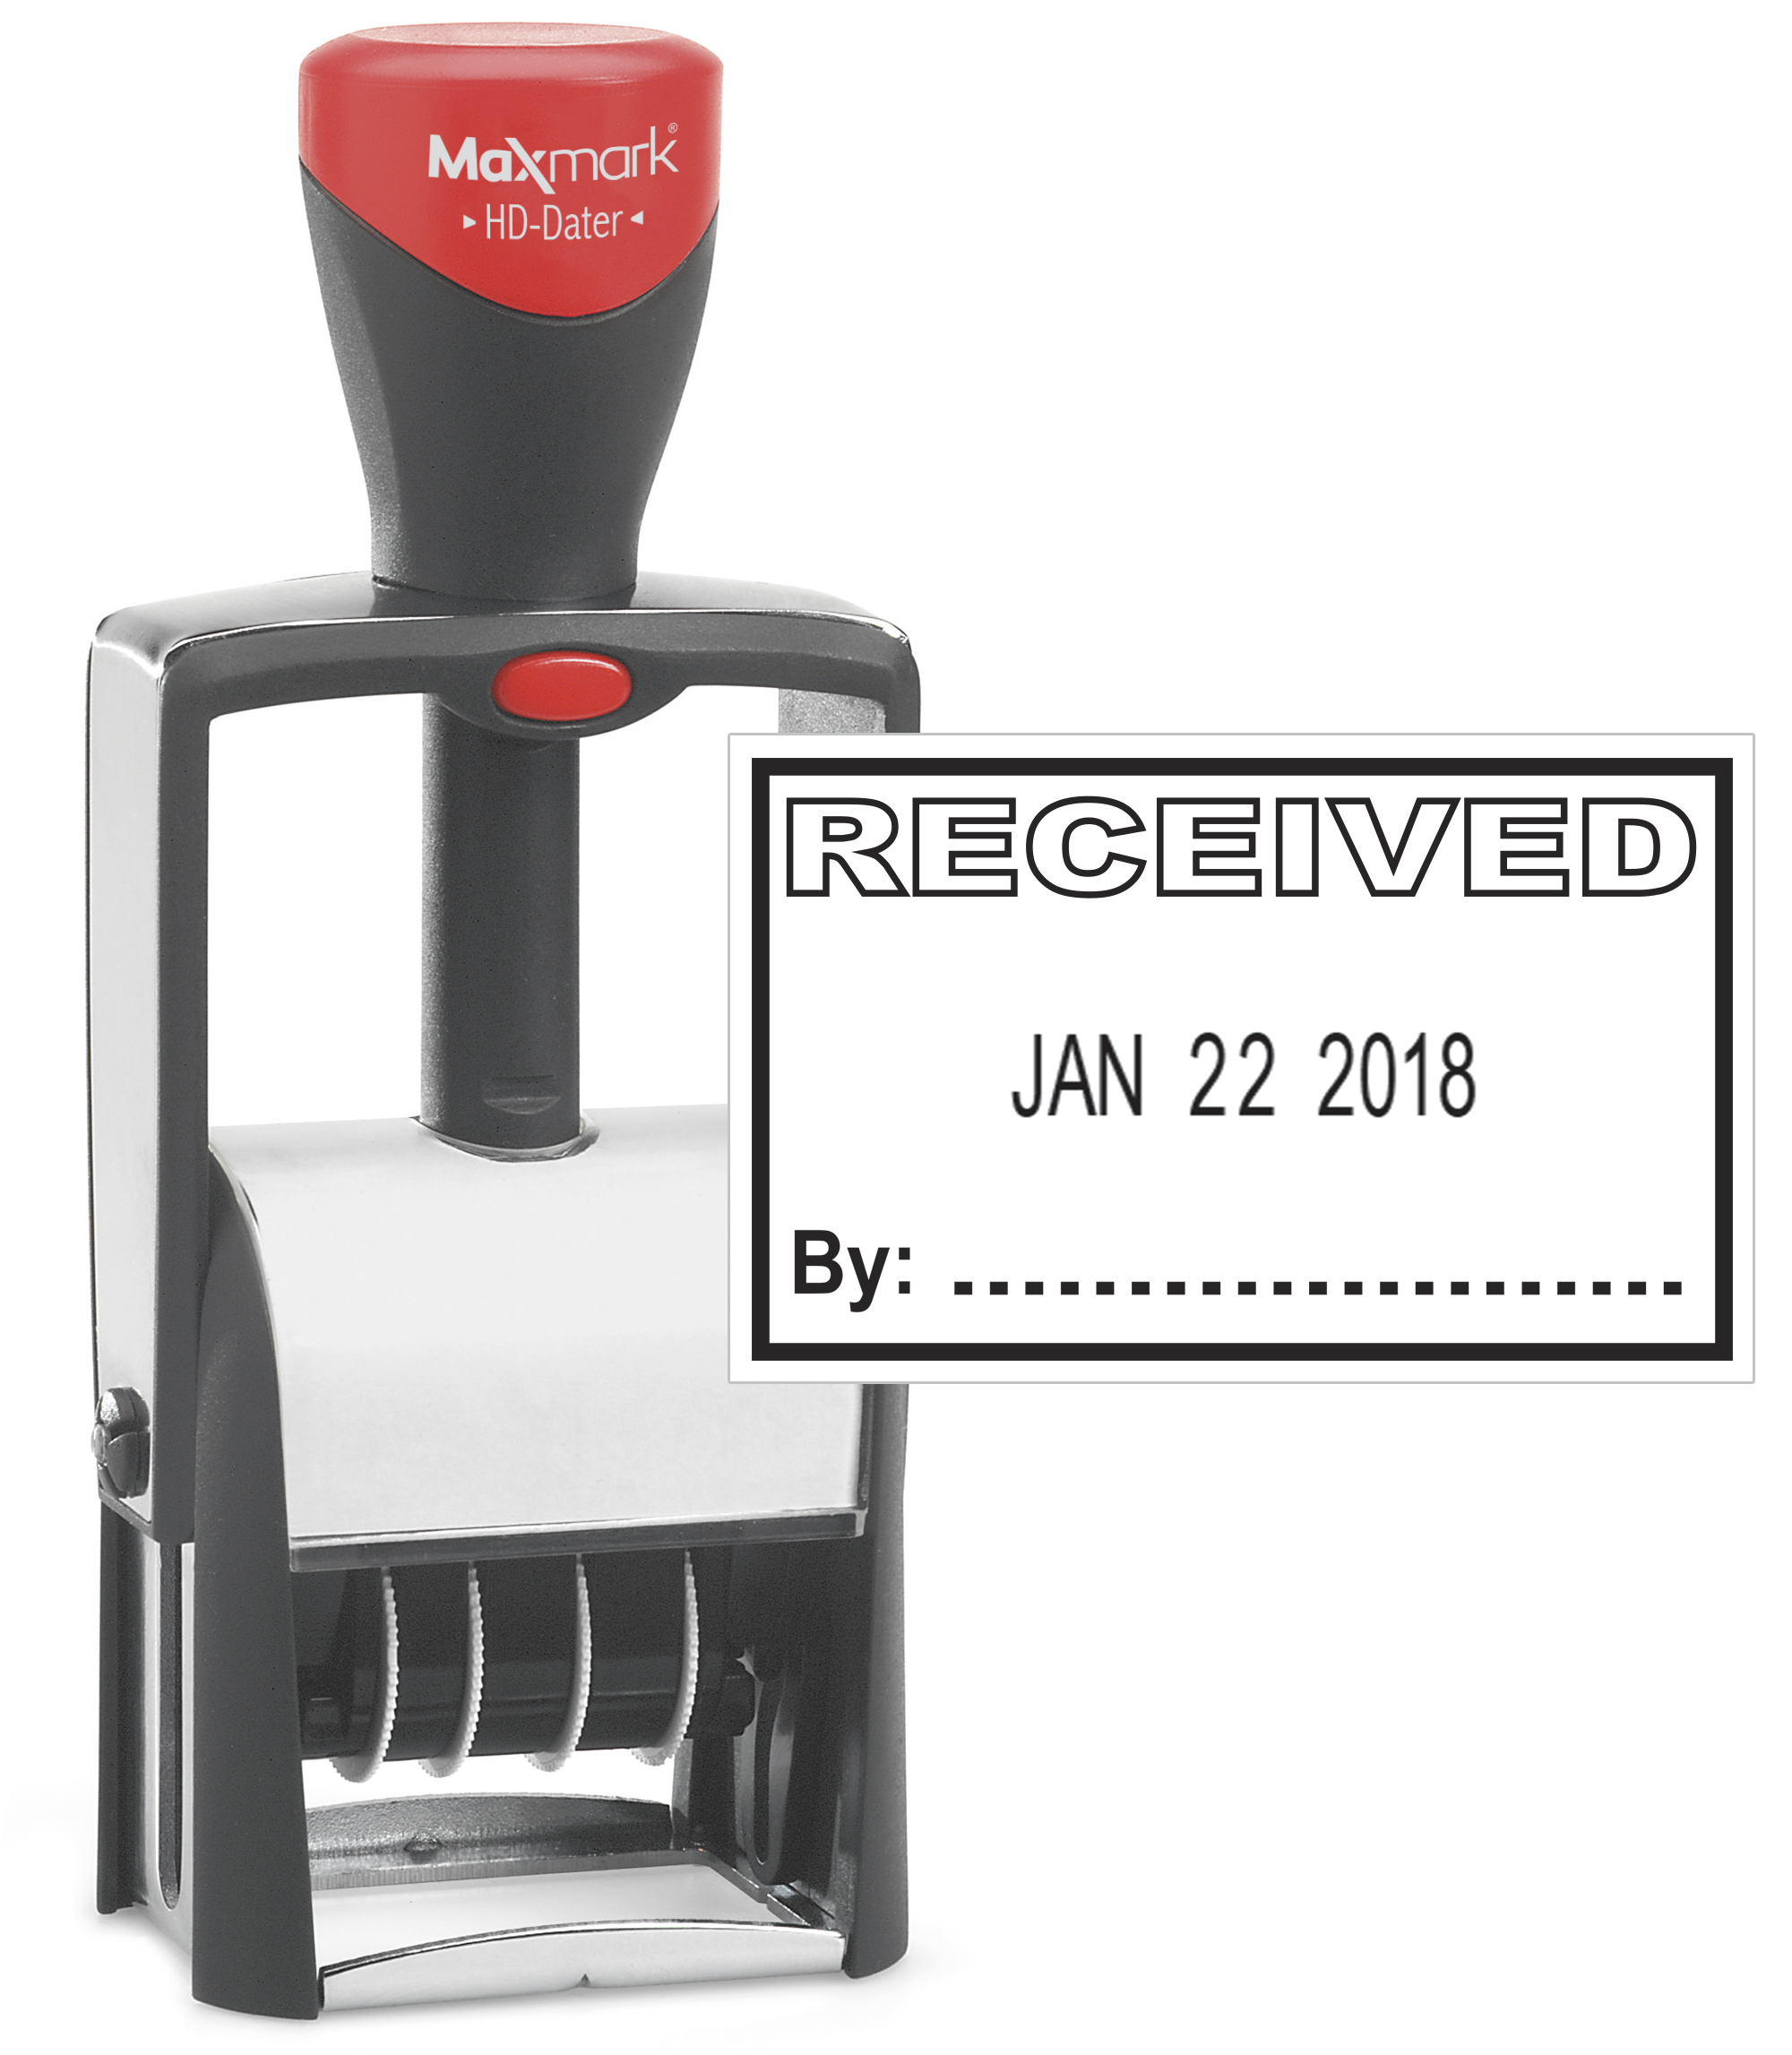 Heavy Duty Date Stamp with "RECEIVED" Self Inking Stamp - BLACK Ink